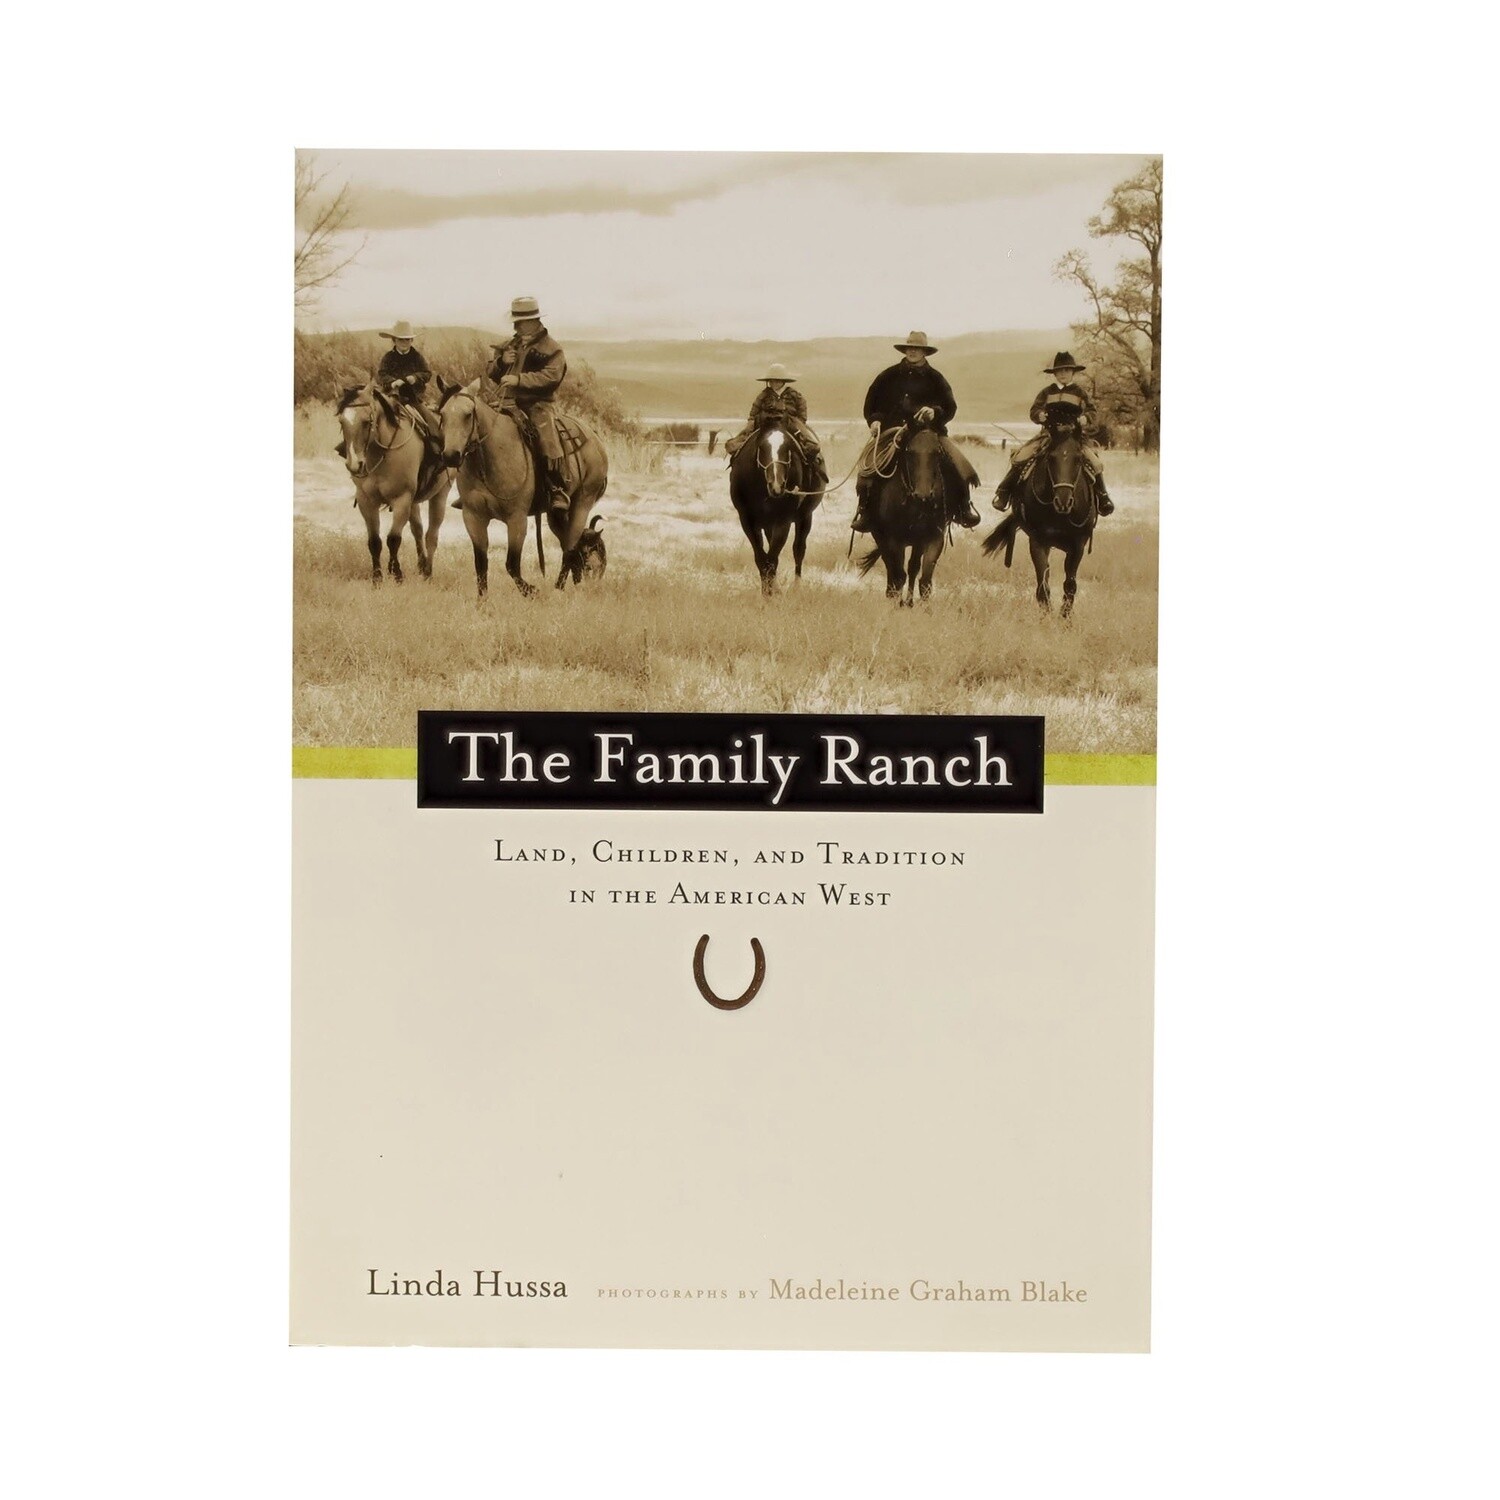 The Family Ranch by Linda Hussa